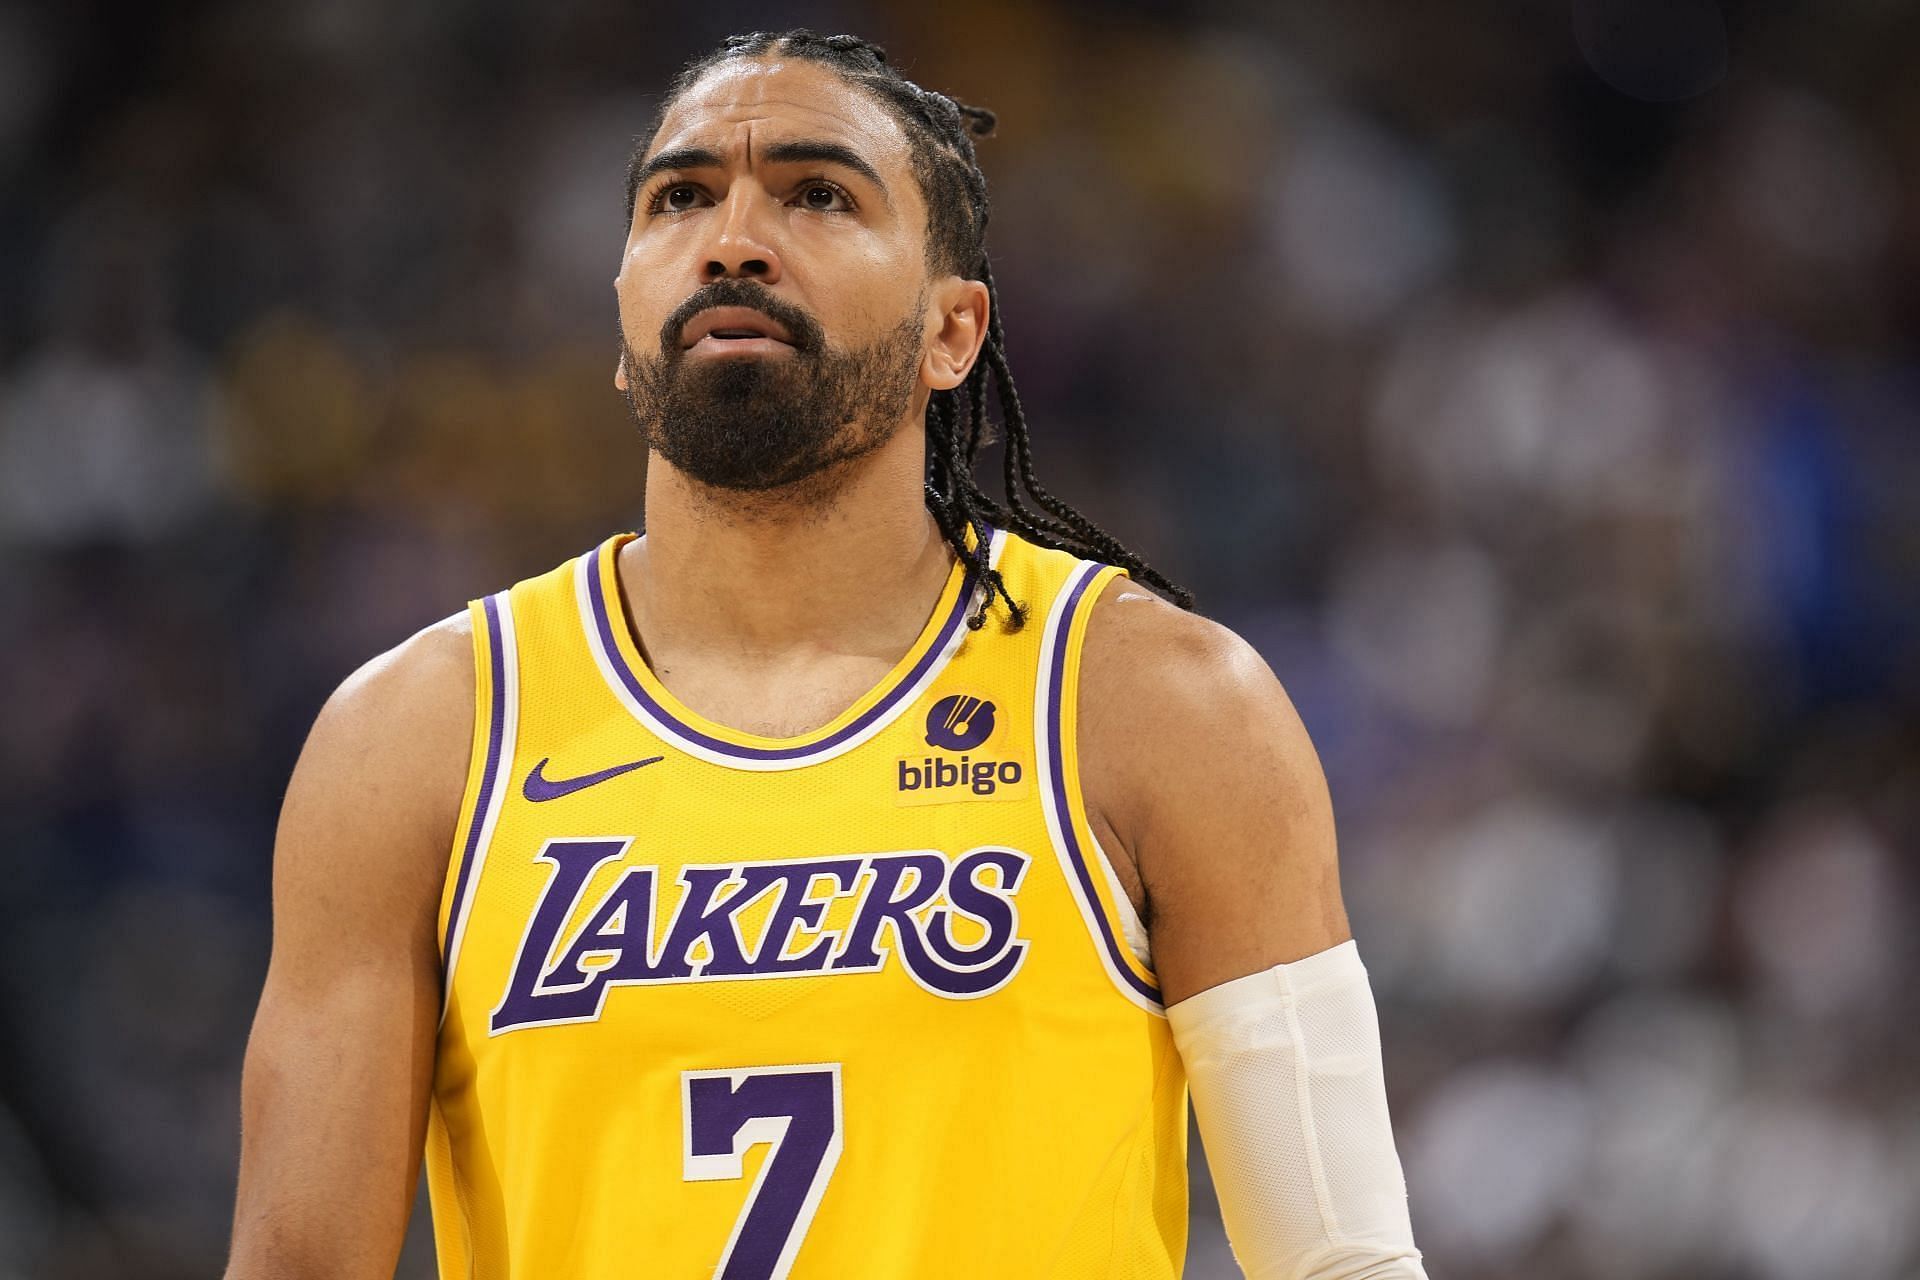 Reports from insiders indicate that the Lakers guard will miss their 25th game of the season due to an update.